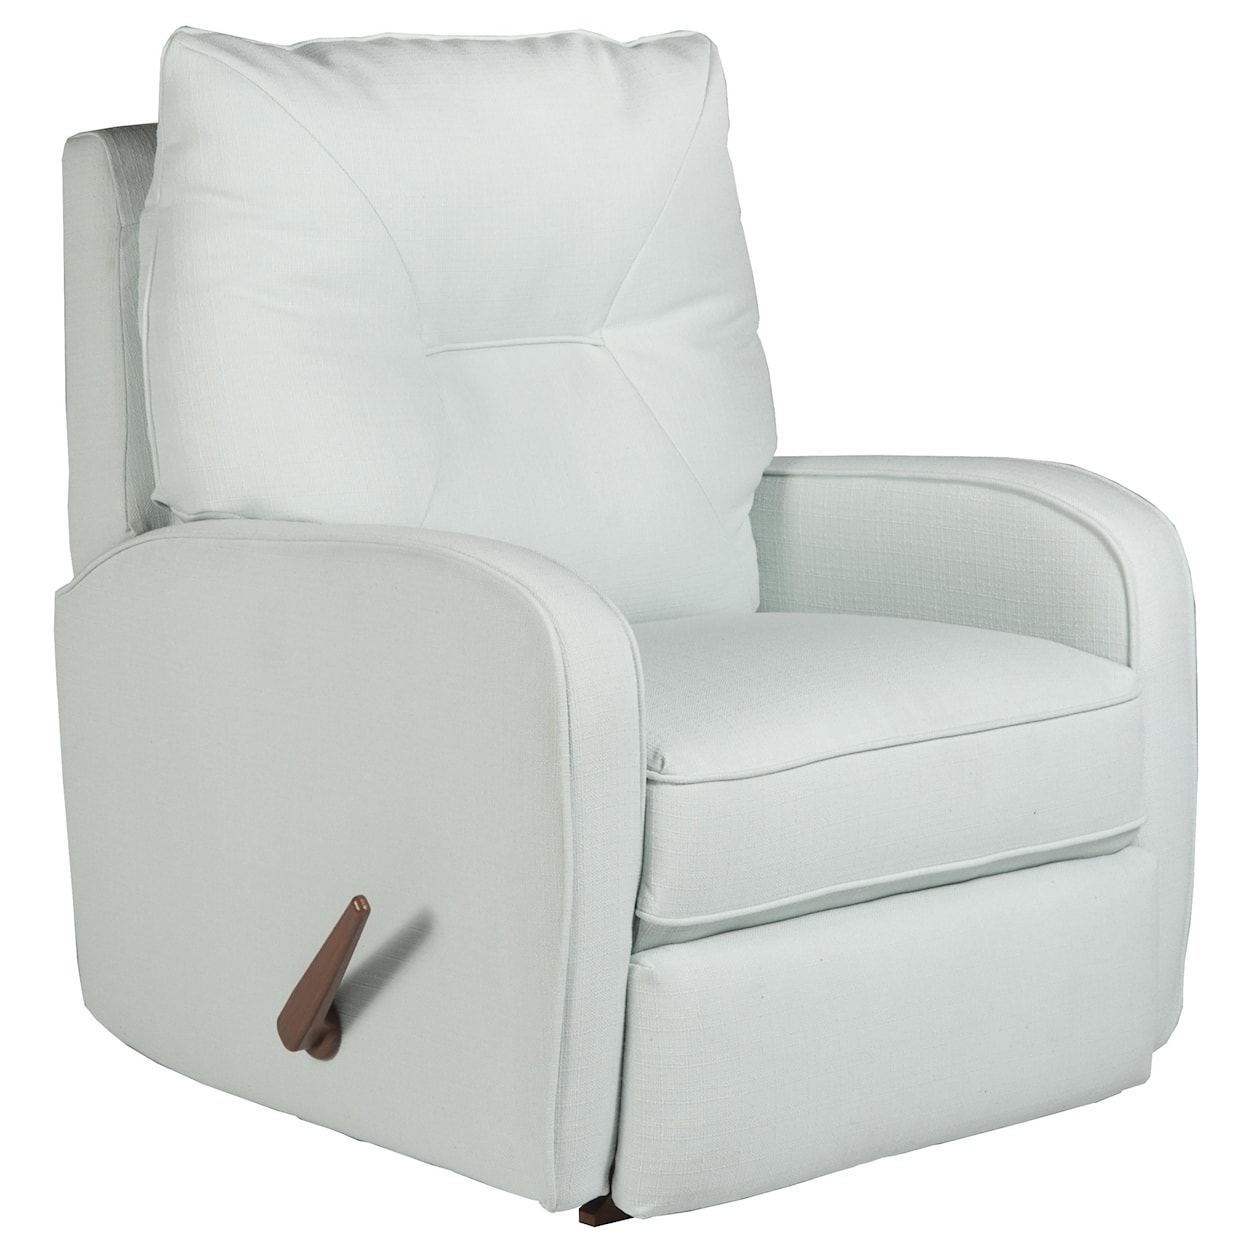 Best Home Furnishings Ingall Ingall Power Swivel Glider Recliner